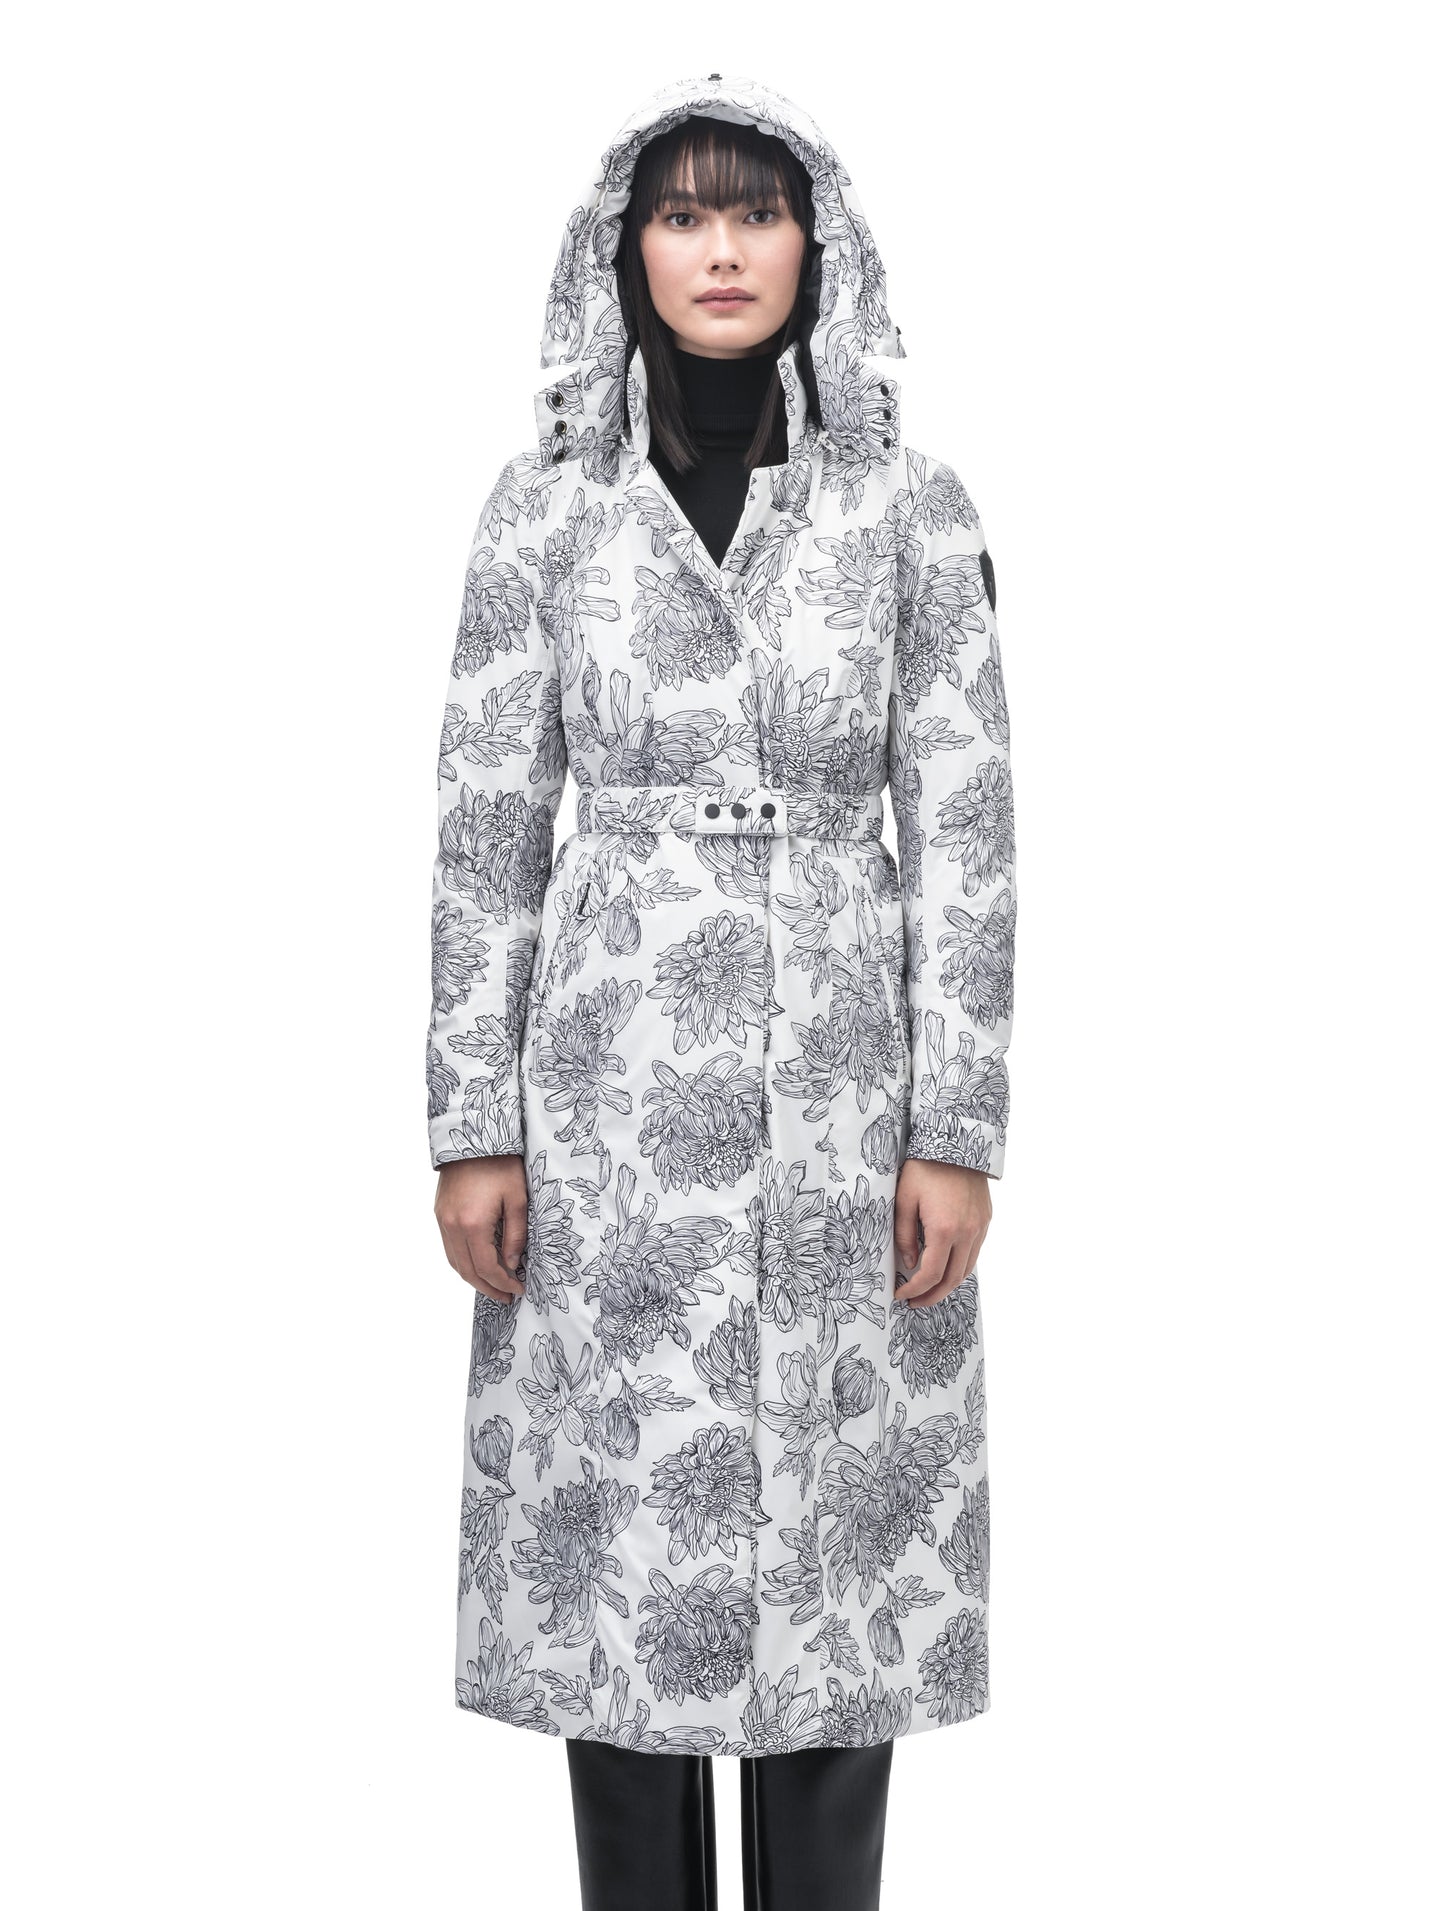 Celest Ladies Duster Parka in knee length, Canadian duck down insulation, removable hood and coyote fur trim, with adjustable belt, in White Floral